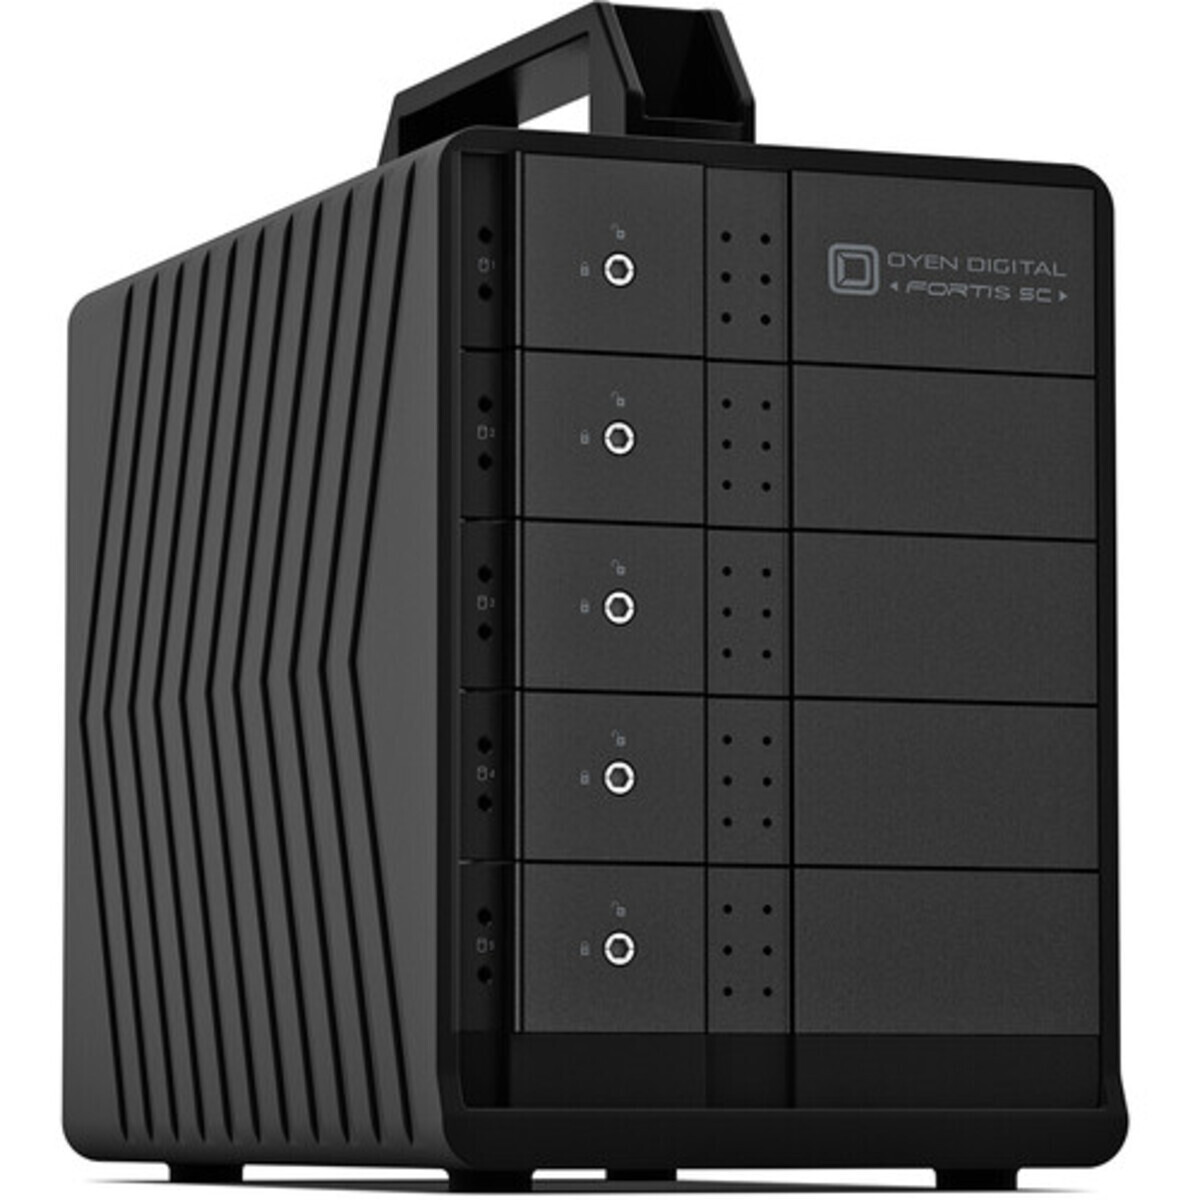 OYEN Fortis 5C 110tb 5-Bay Desktop Multimedia / Power User / Business DAS - Direct Attached Storage Device 5x22tb Toshiba Enterprise Capacity MG10AFA22TE 3.5 7200rpm SATA 6Gb/s HDD ENTERPRISE Class Drives Installed - Burn-In Tested Fortis 5C